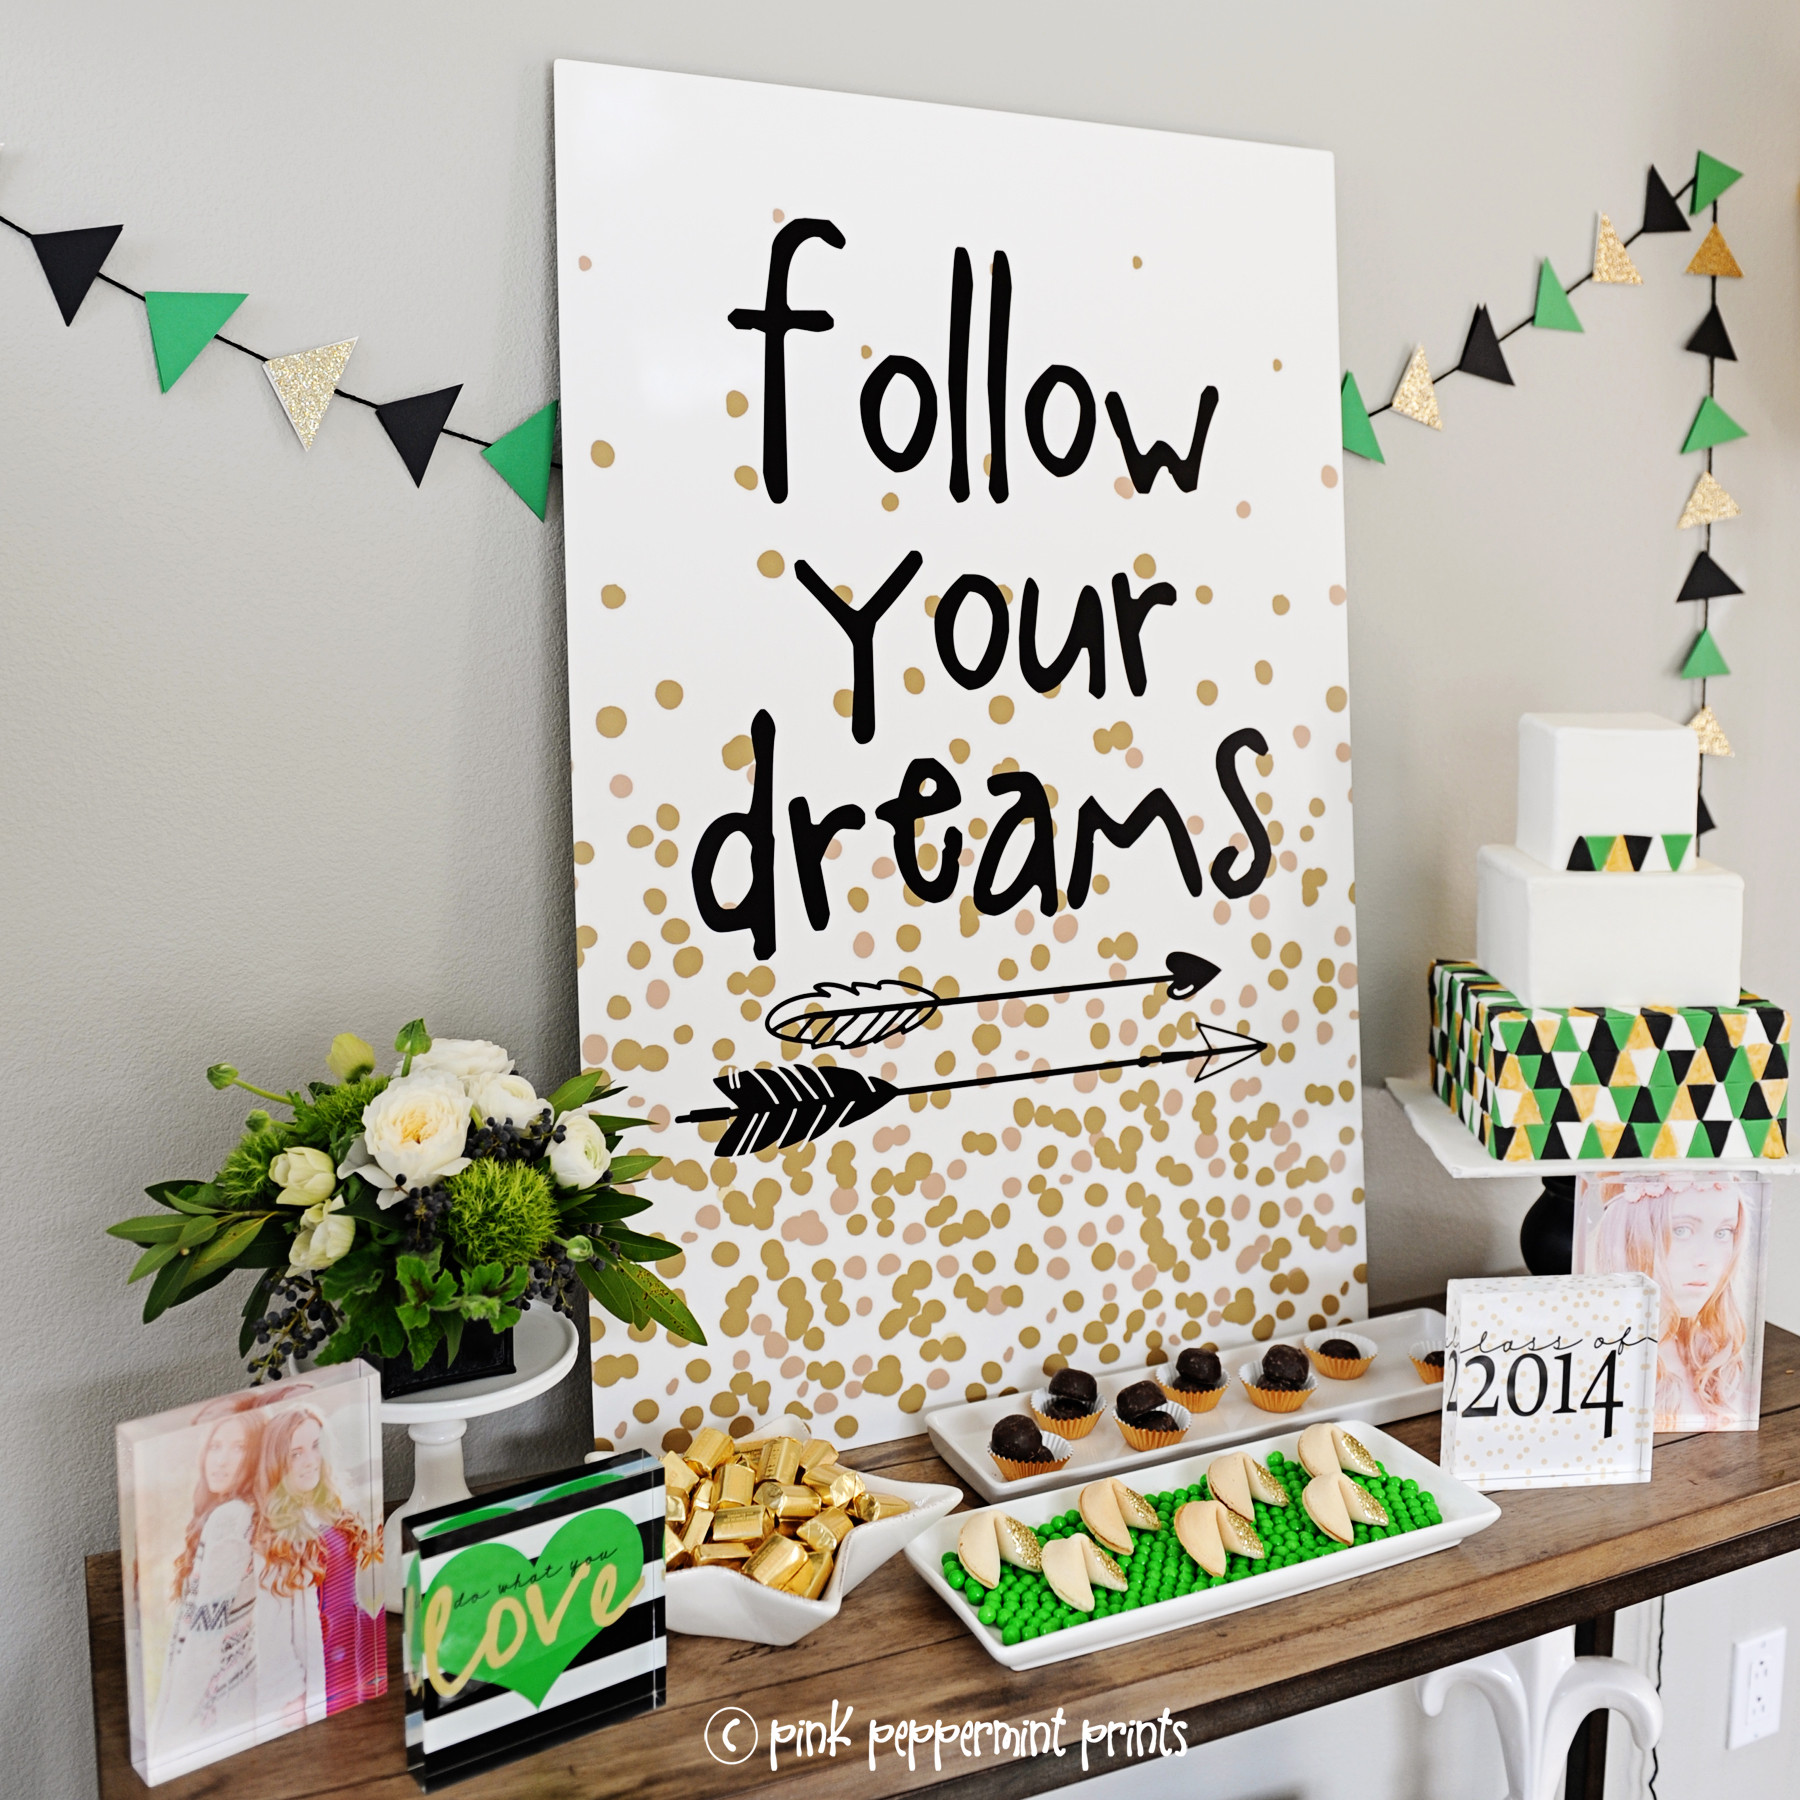 Ideas For A College Graduation Party
 FUN High School Graduation Party Ideas & Decorations